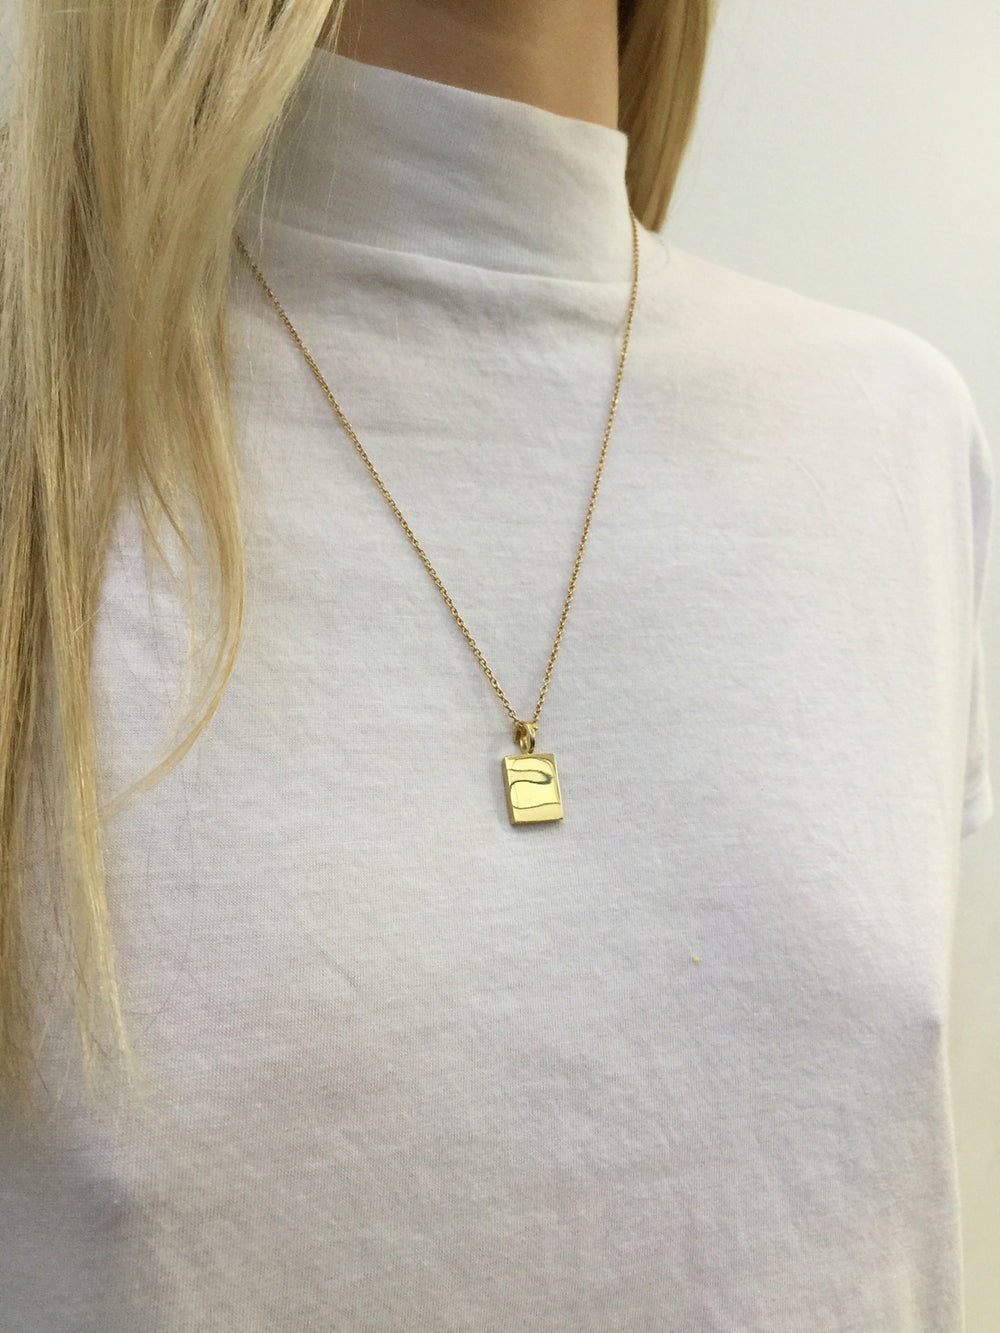 ID Tag Necklace | Yellow Gold